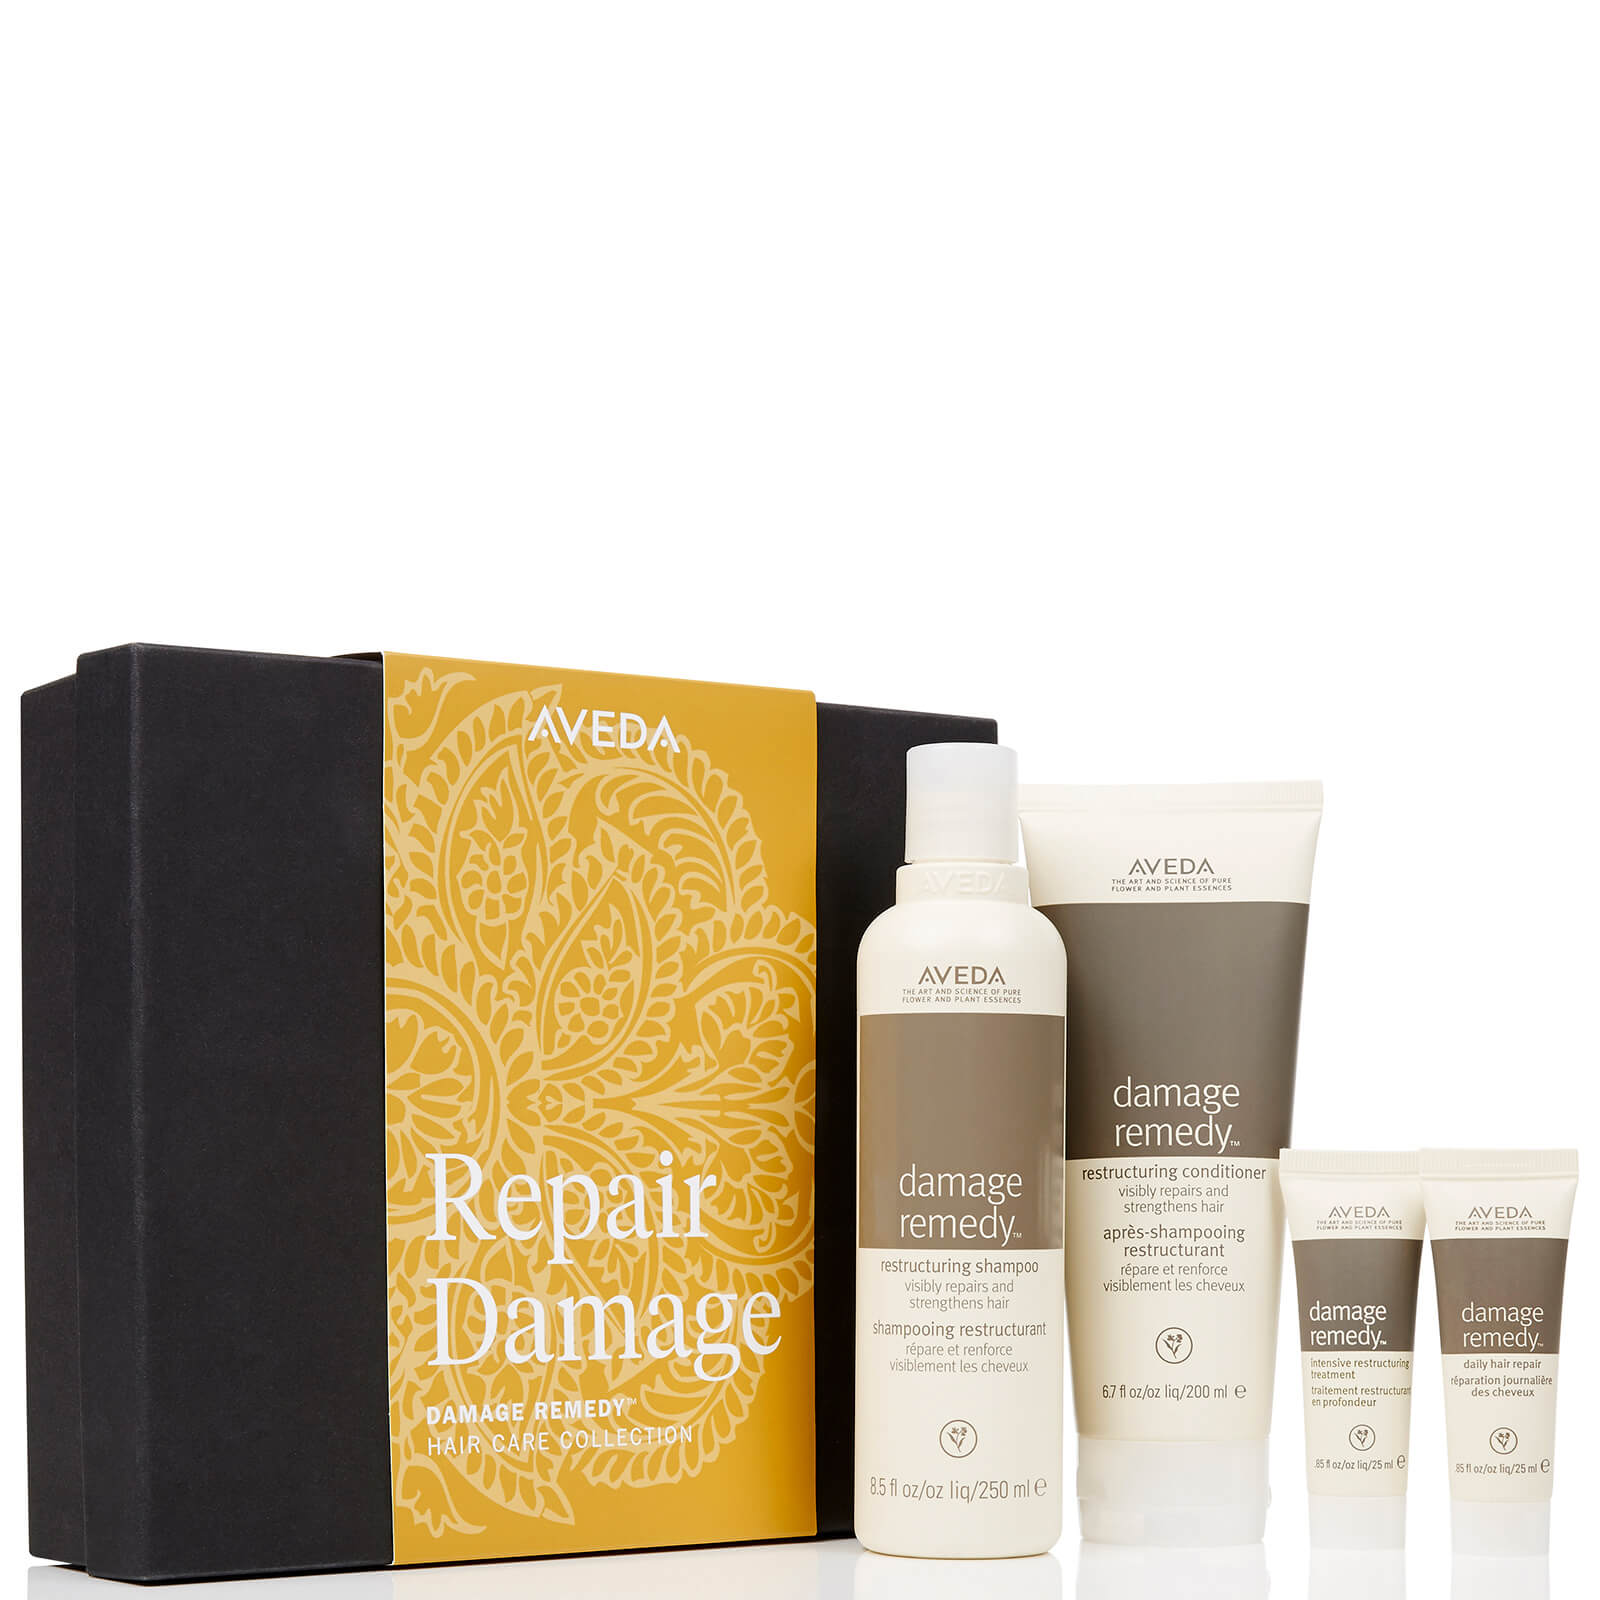 Aveda Repair Damage Hair Care Collection